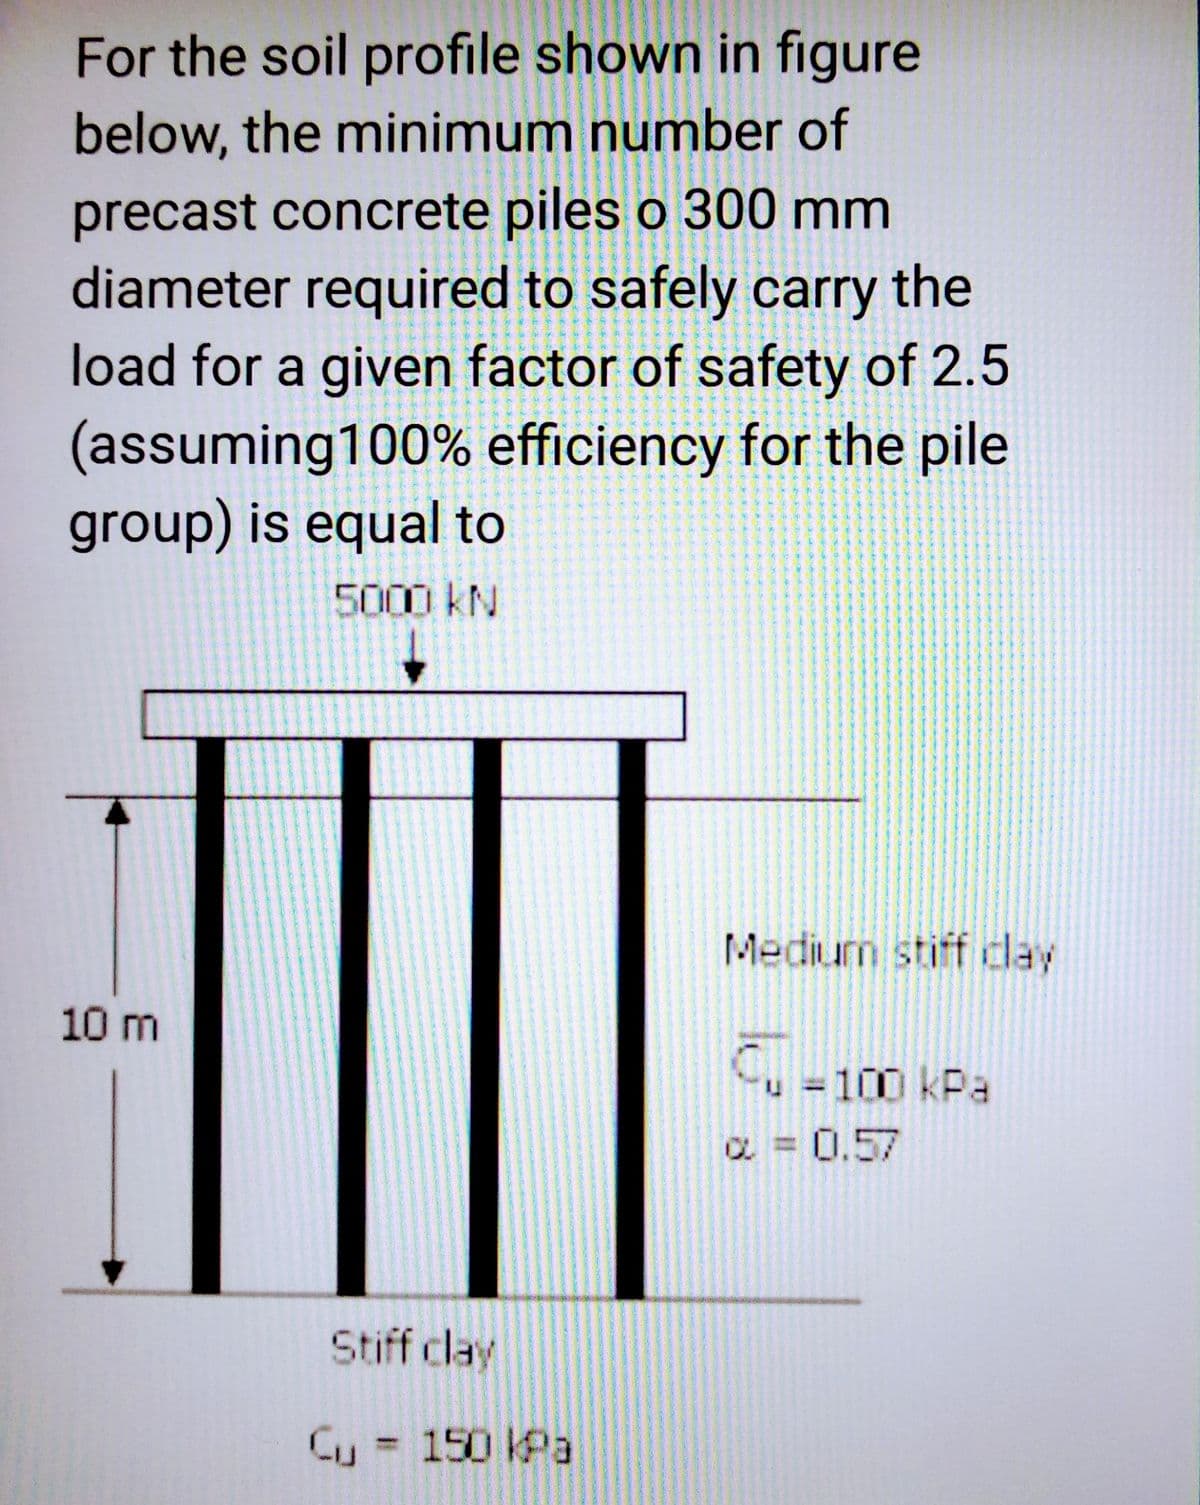 For the soil profile shown in figure
below, the minimum number of
precast concrete piles o 300 mm
diameter required to safely carry the
load for a given factor of safety of 2.5
(assuming100% efficiency for the pile
group) is equal to
5000 KN
10 m
Stiff clay
Cu = 150 ka
Medium stiff clay
CU-100 kPa
Q = 0.57